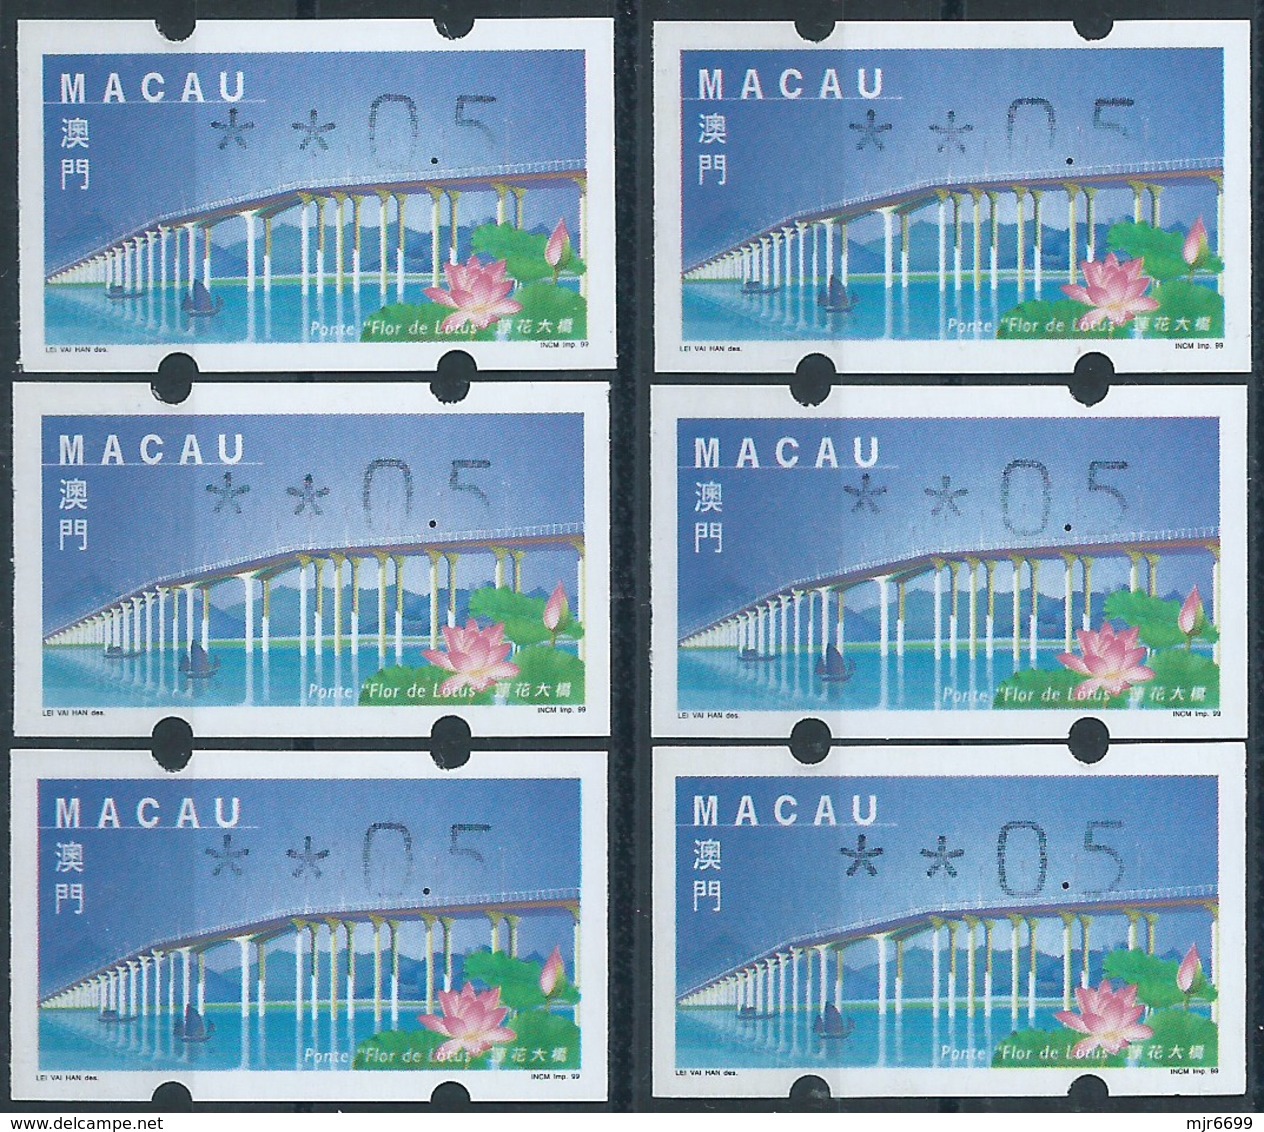 MACAU ATM LABELS, 1999 LOTUS FLOWER BRIDGE ISSUE, 50 AVOS WITH VALUE HALF PRINTED LOT OF 5 + 1 NORMAL FOR COMPARE - Distribuidores